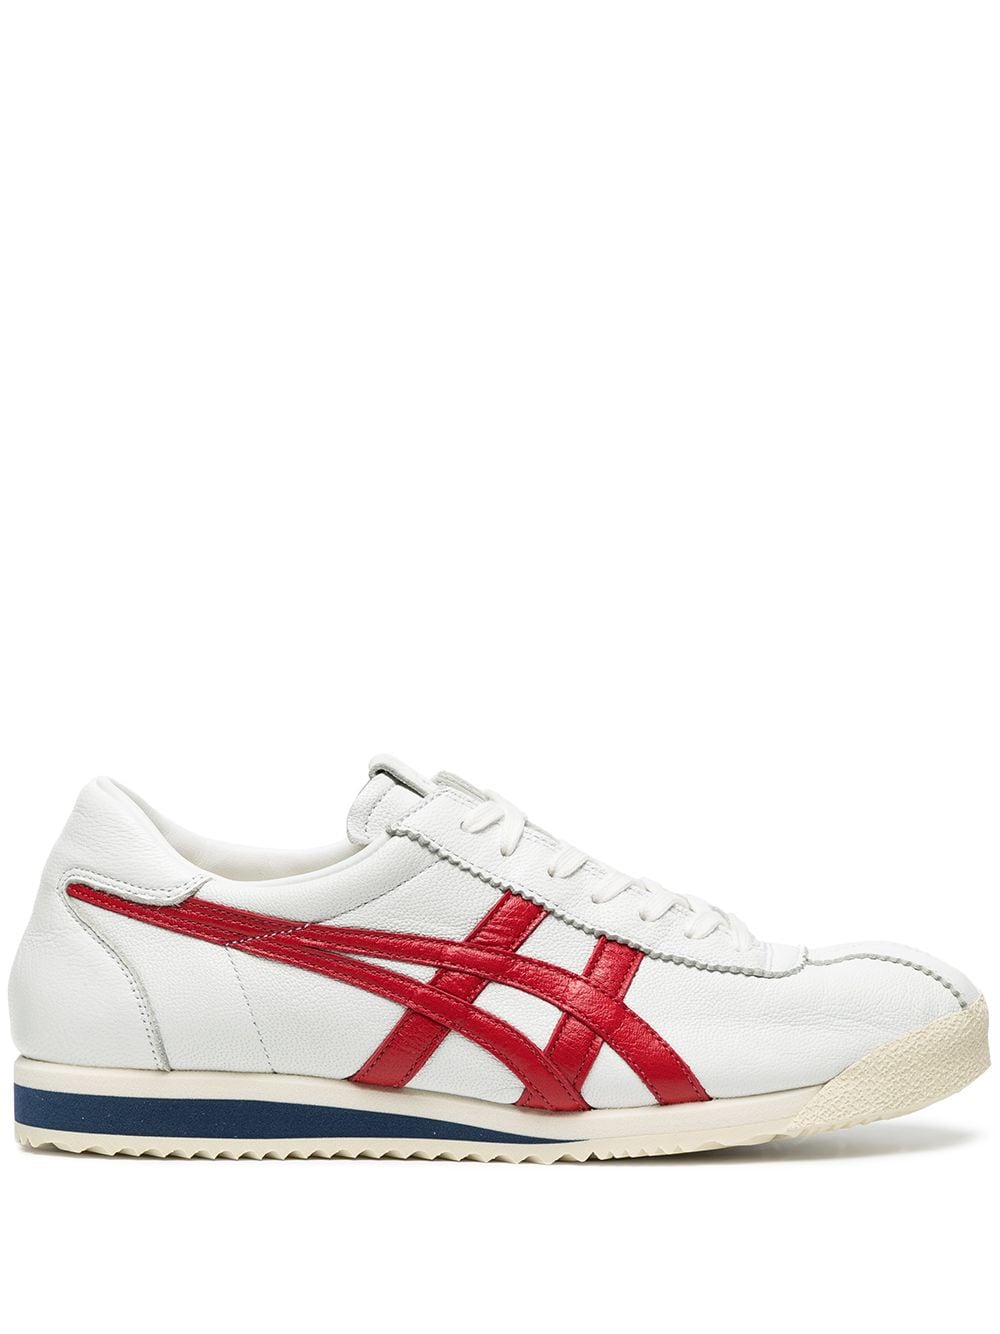 Onitsuka Tiger Tiger Corsair Deluxe low-top sneakers - White von Onitsuka Tiger